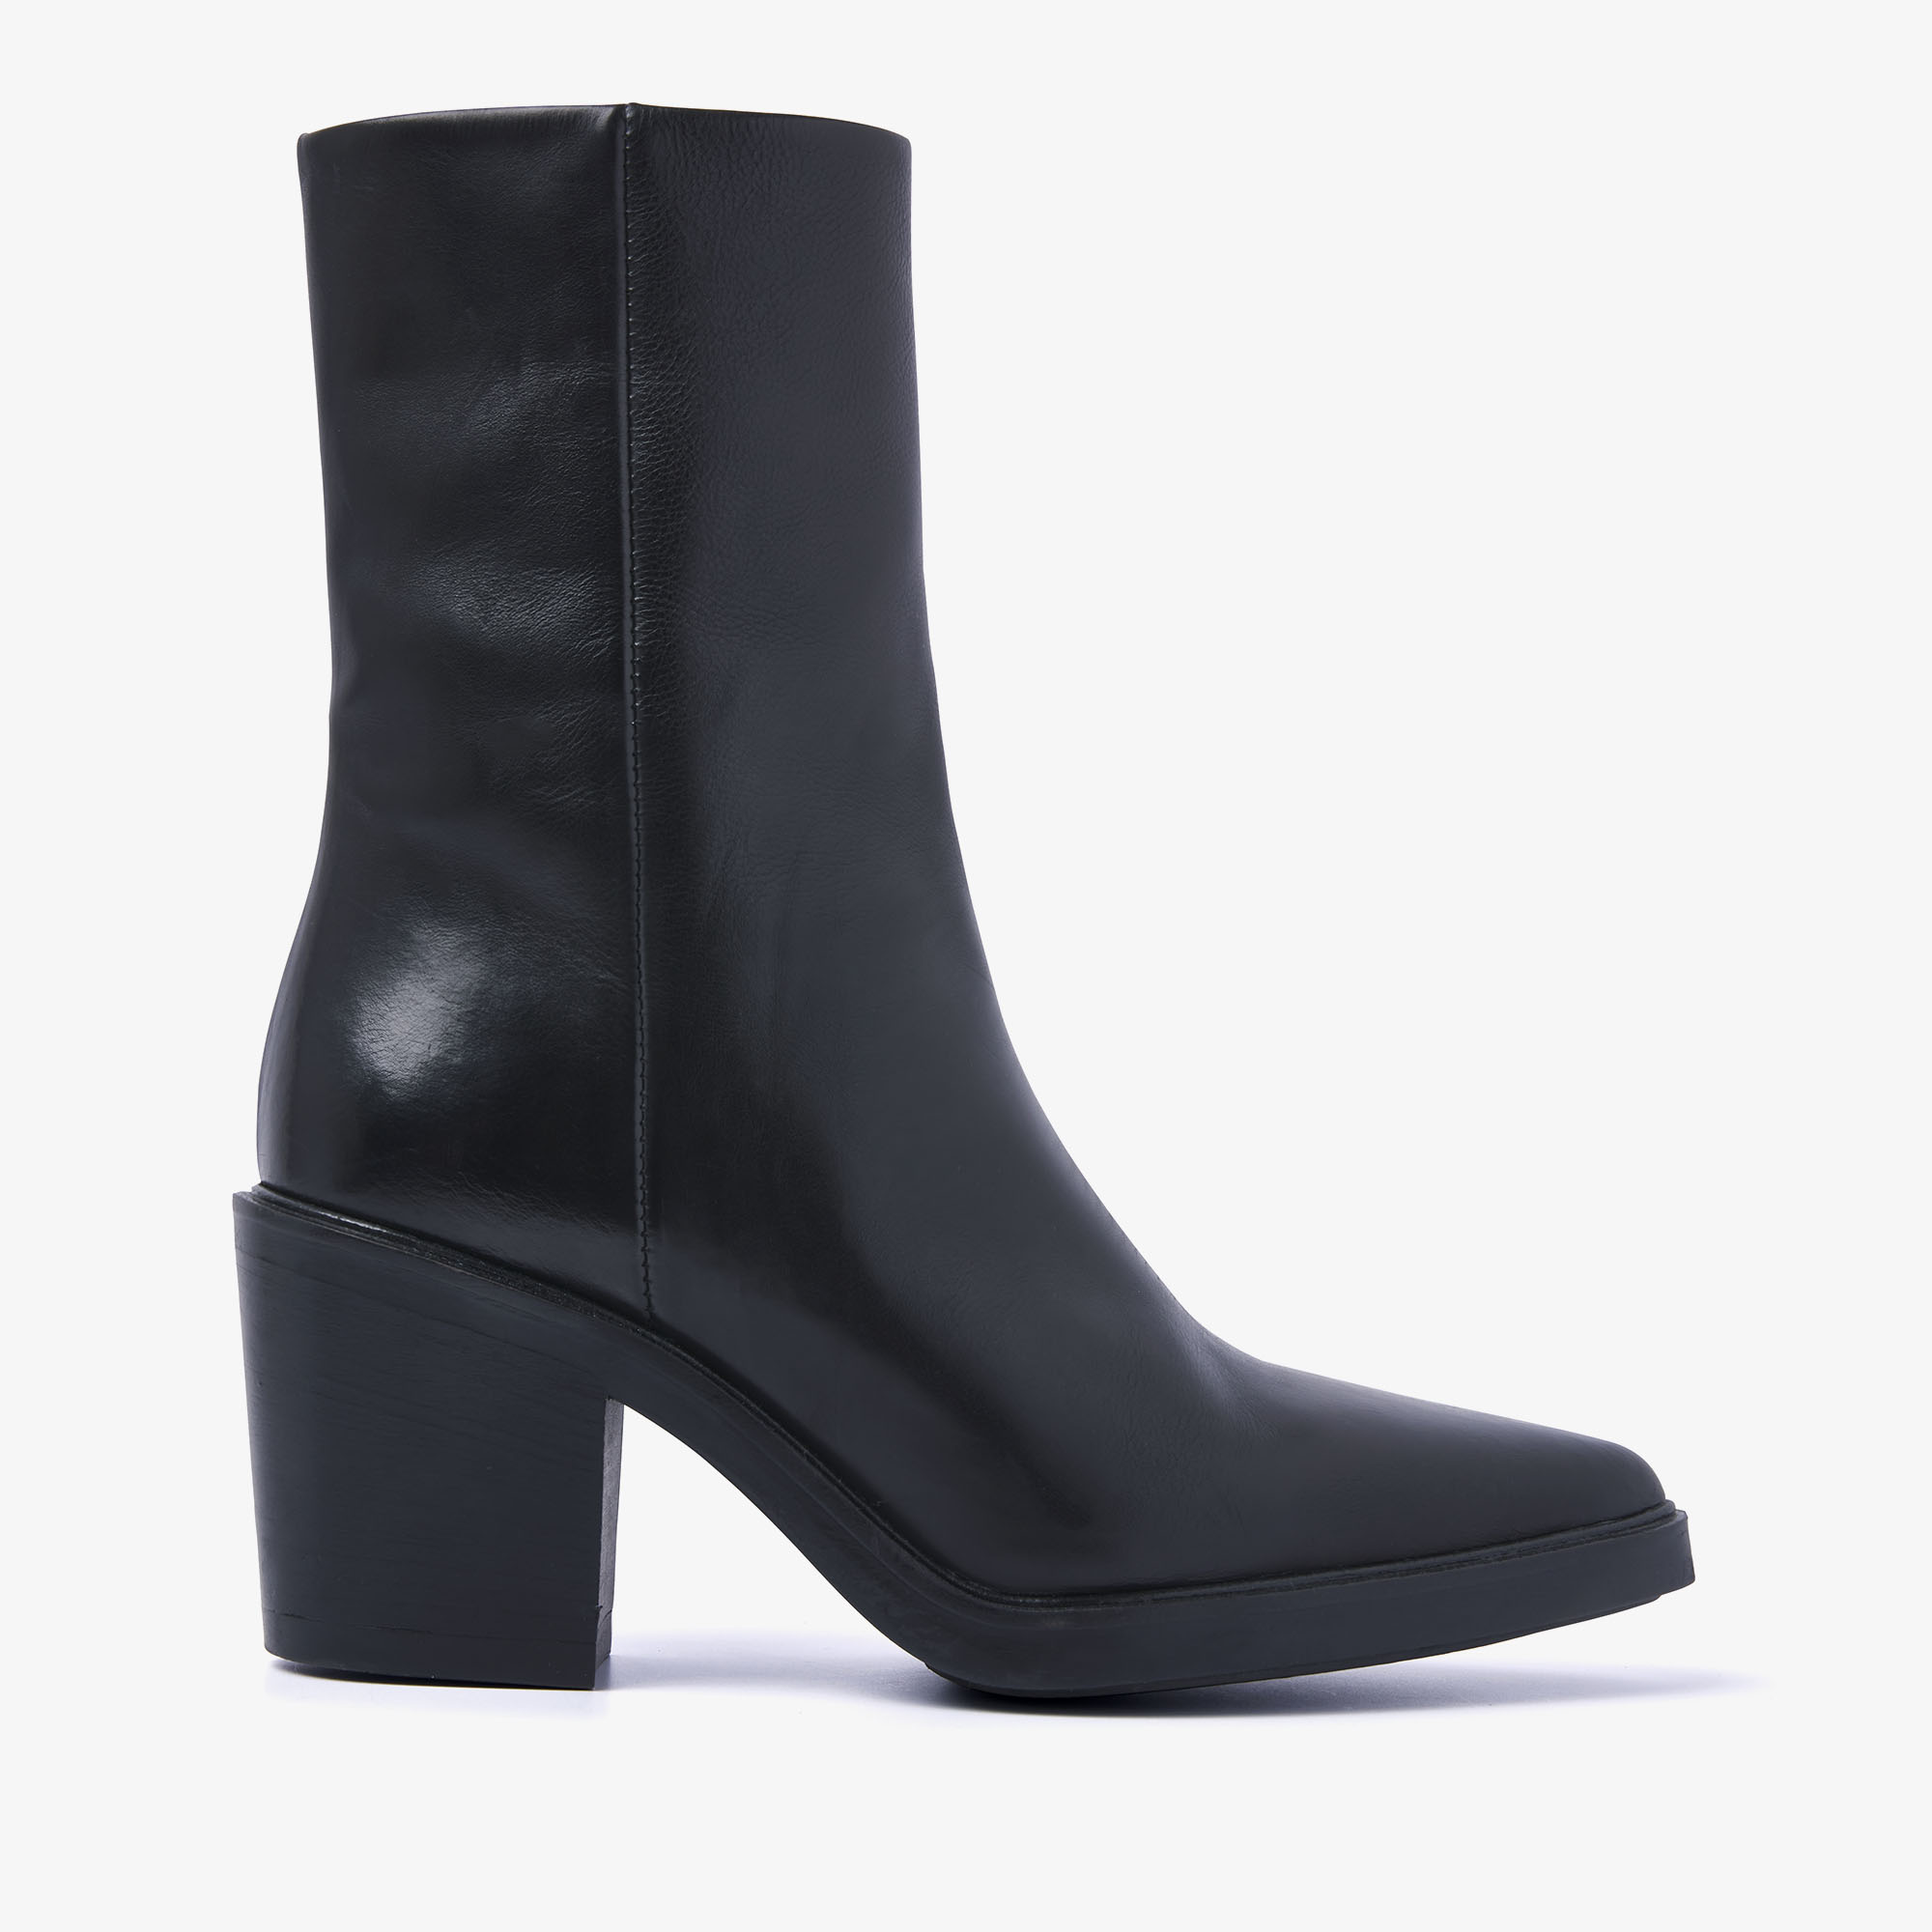 VIA VAI Kailee Faye black ankle boots